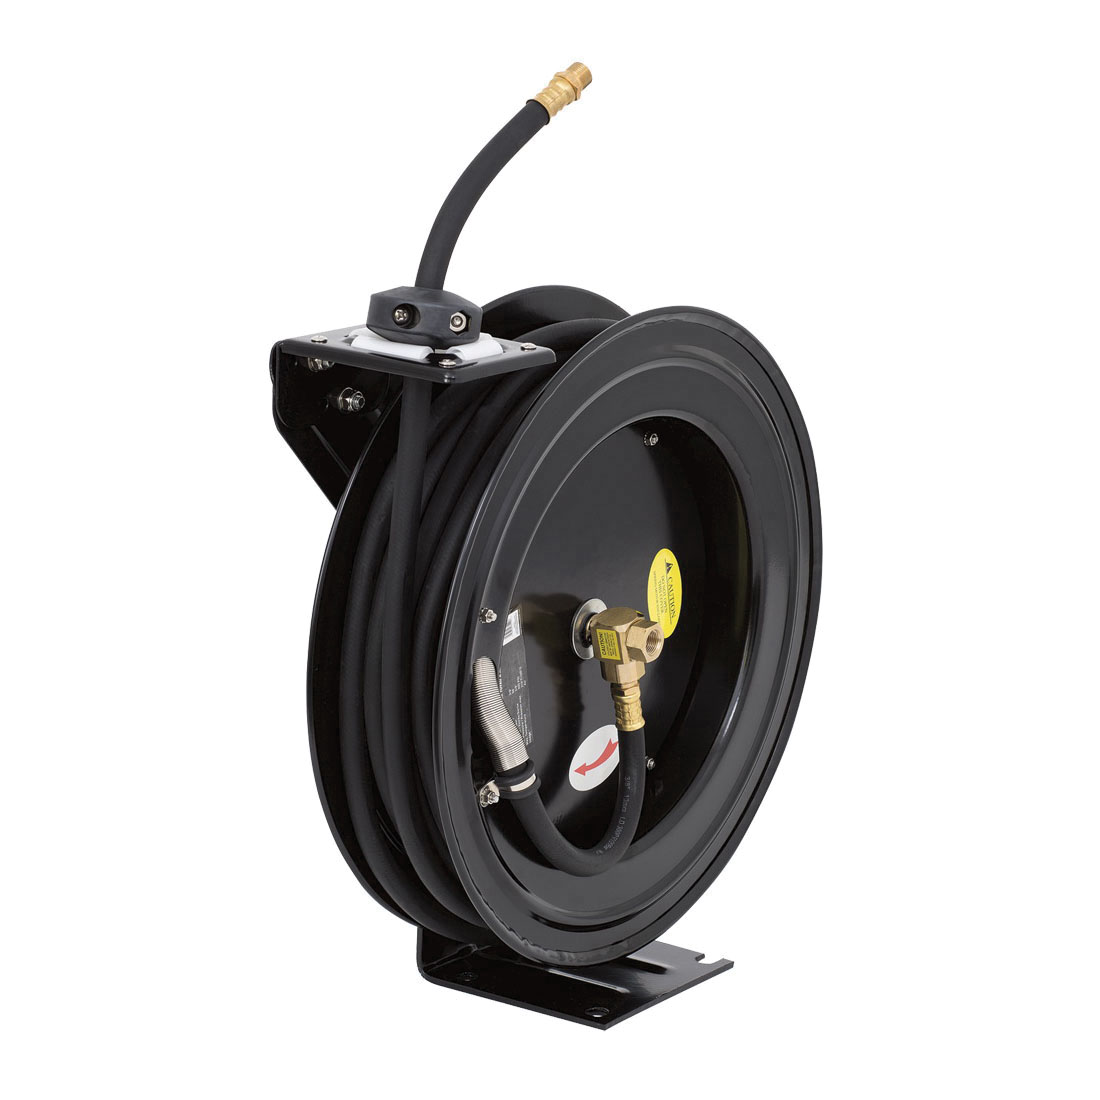 ITC® 028272 Retractable Hose Reel, 3/8 in ID x 50 ft L Hose, 300